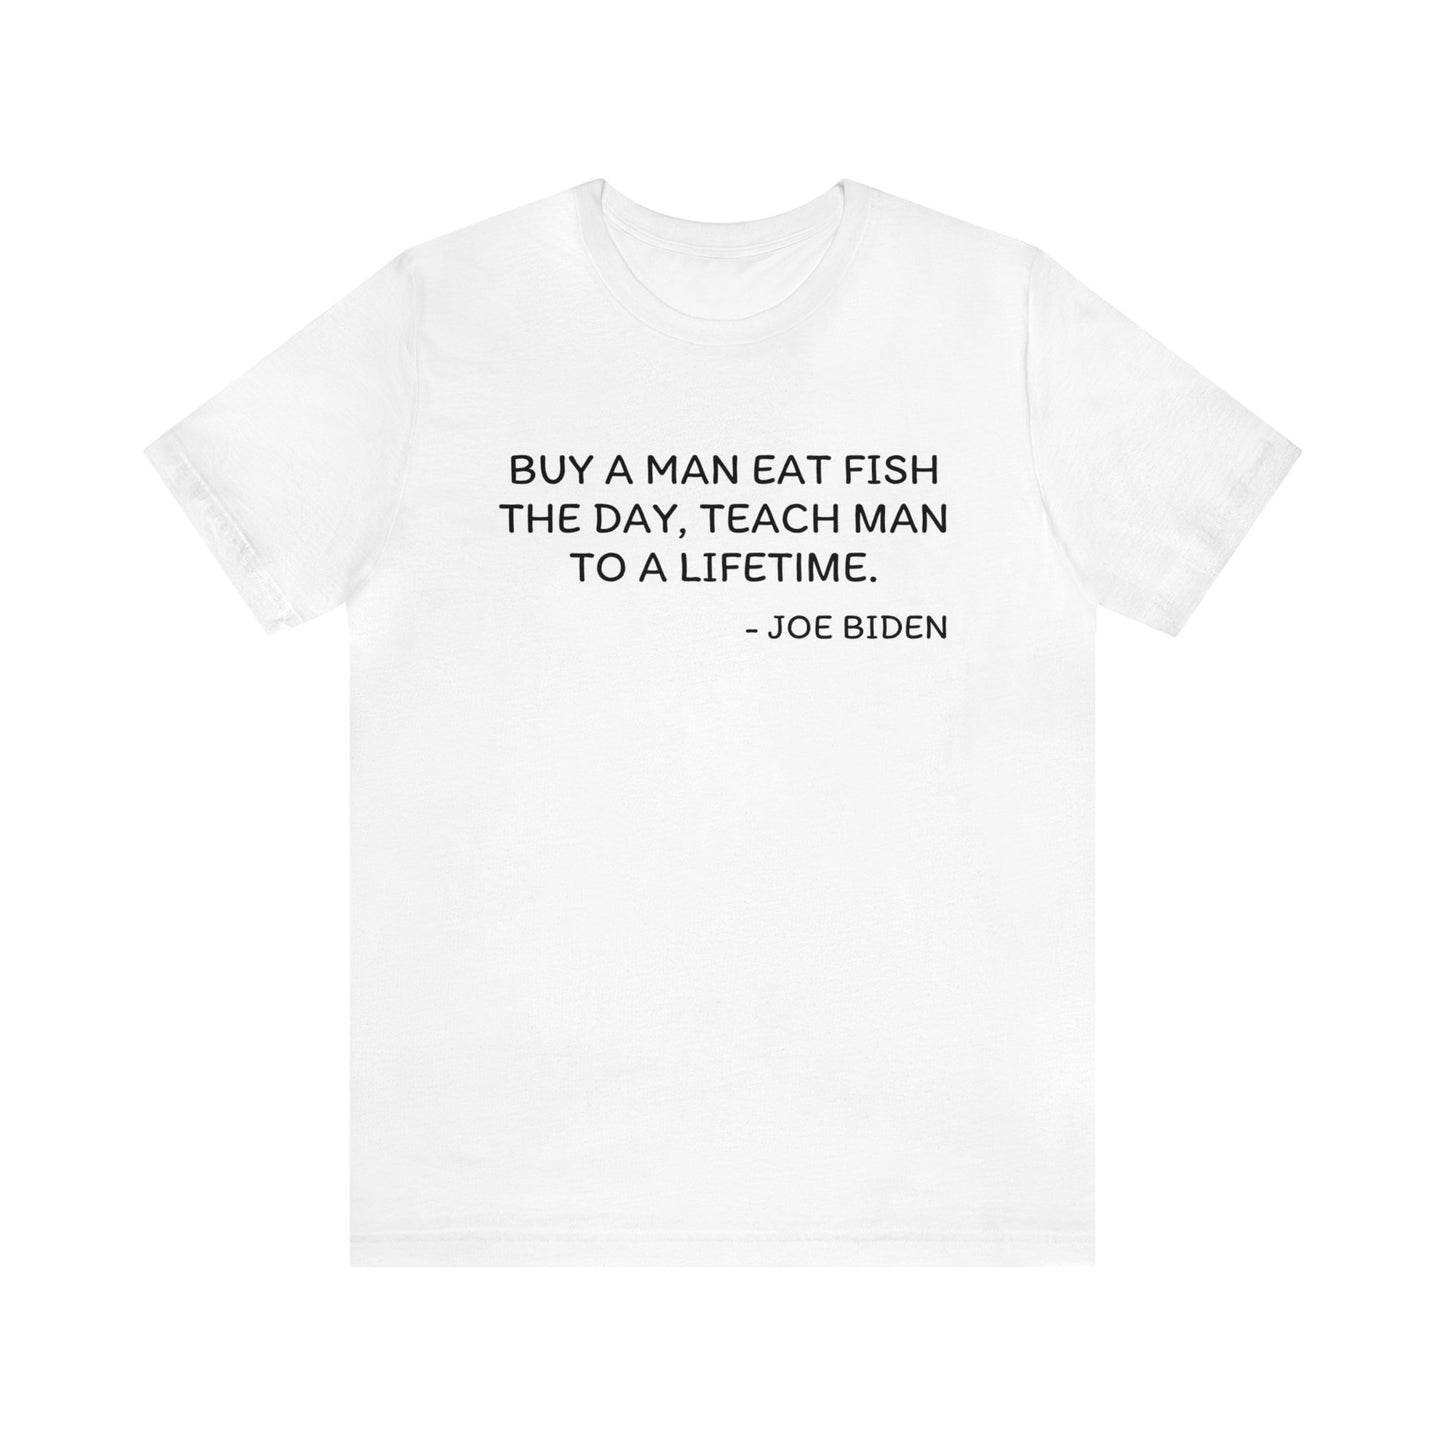 Joe Biden Buy a Man Eat Fish T-Shirt, Conservative Humor T-Shirt, Funny Political Quote, Unisex Adult Tee, Casual Comfortable Shirt, Gift for Politically Savvy Friends - News For Reasonable People